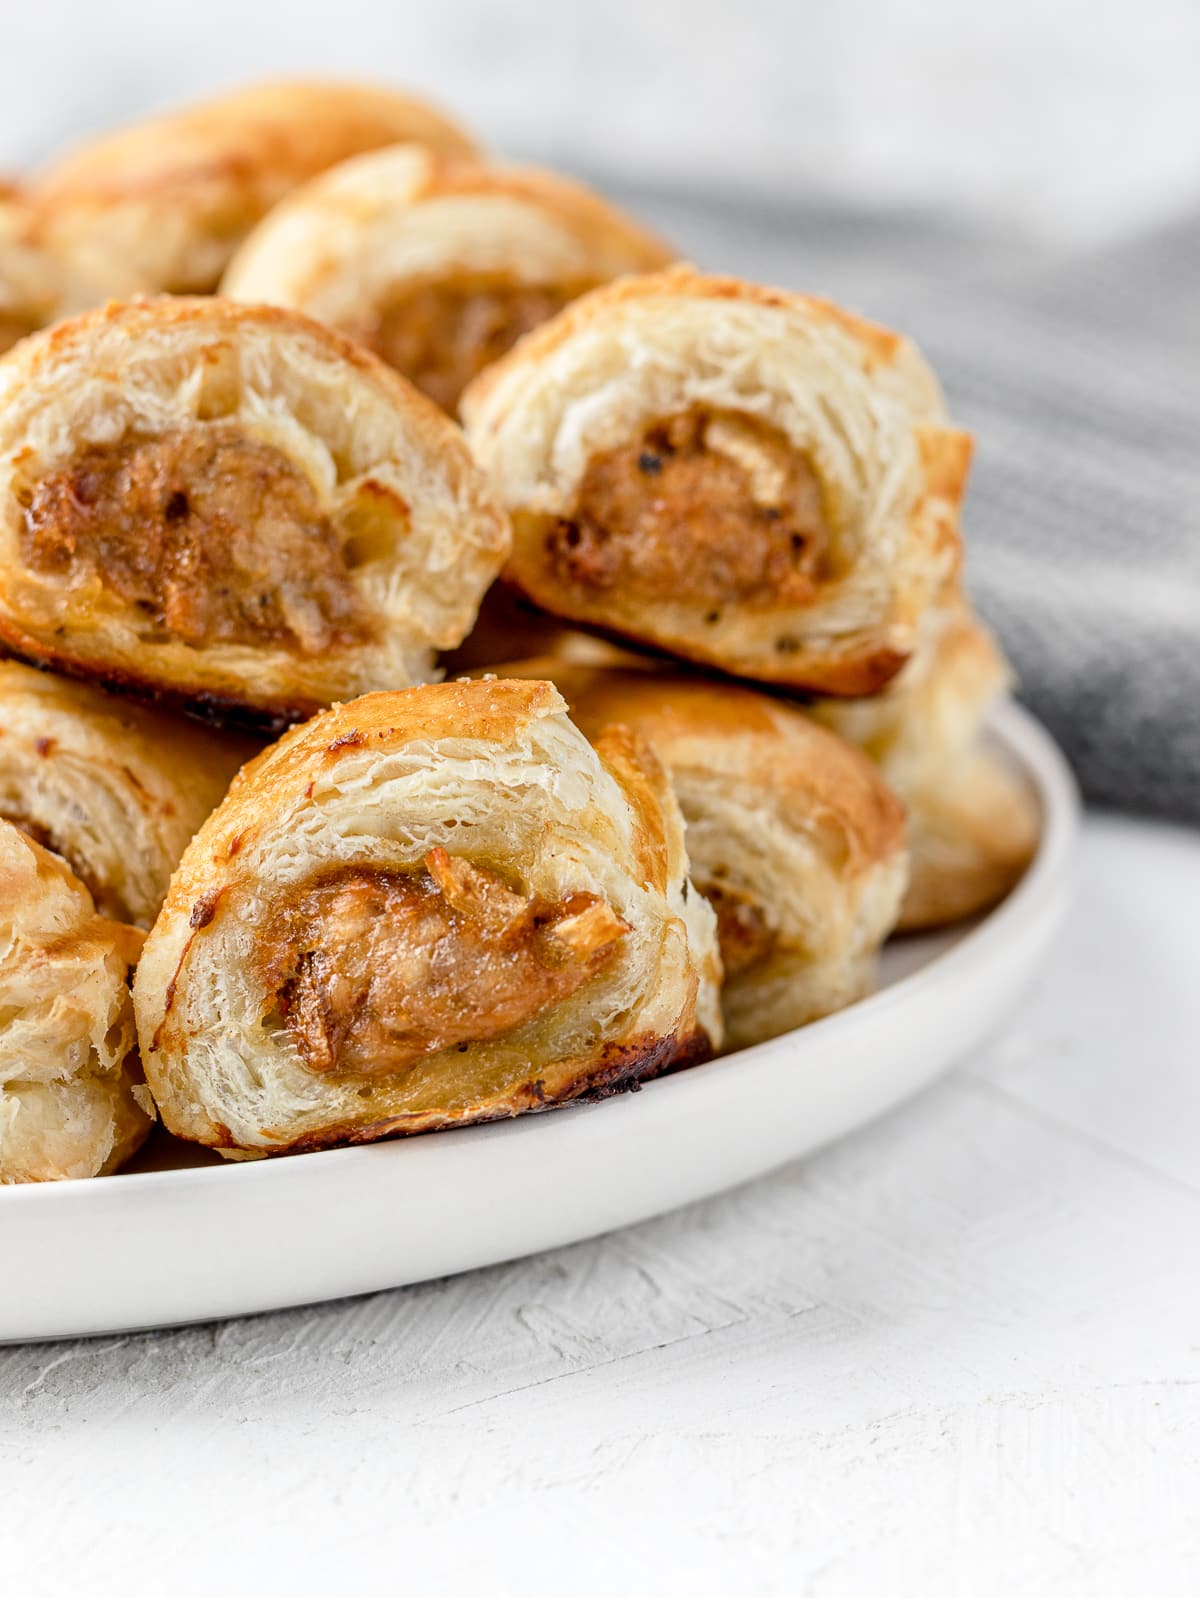 flaky, golden brown Chicken Sausage Rolls stacked and ready to eat.